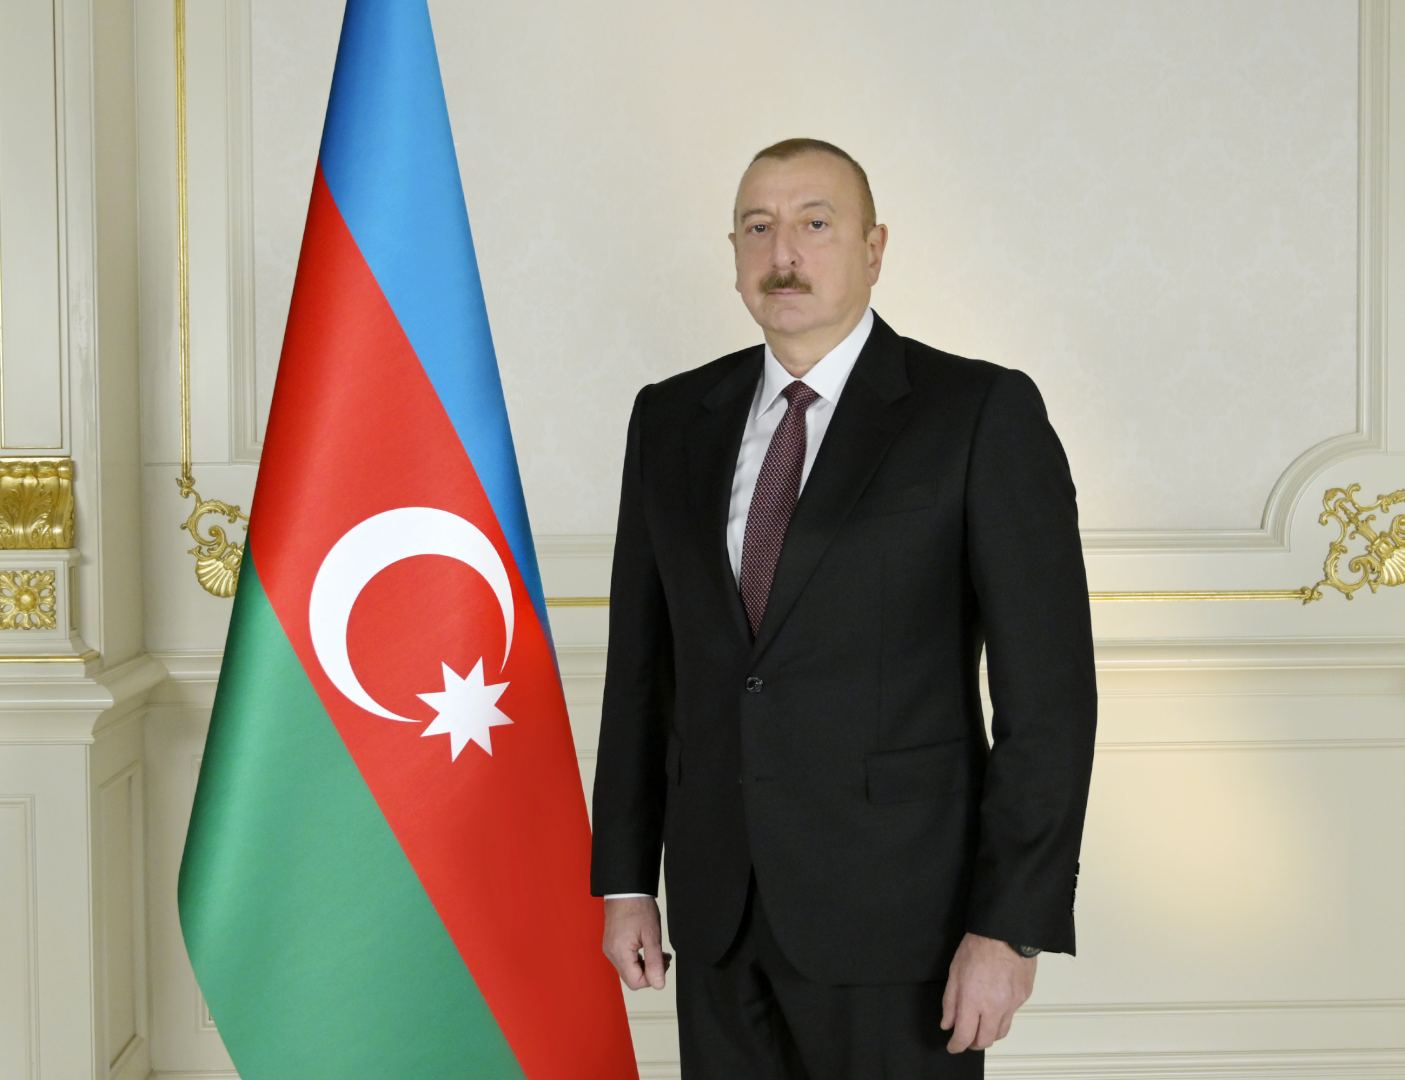 President Ilham Aliyev extends congratulations on International Solidarity Day of Azerbaijanis and New Year